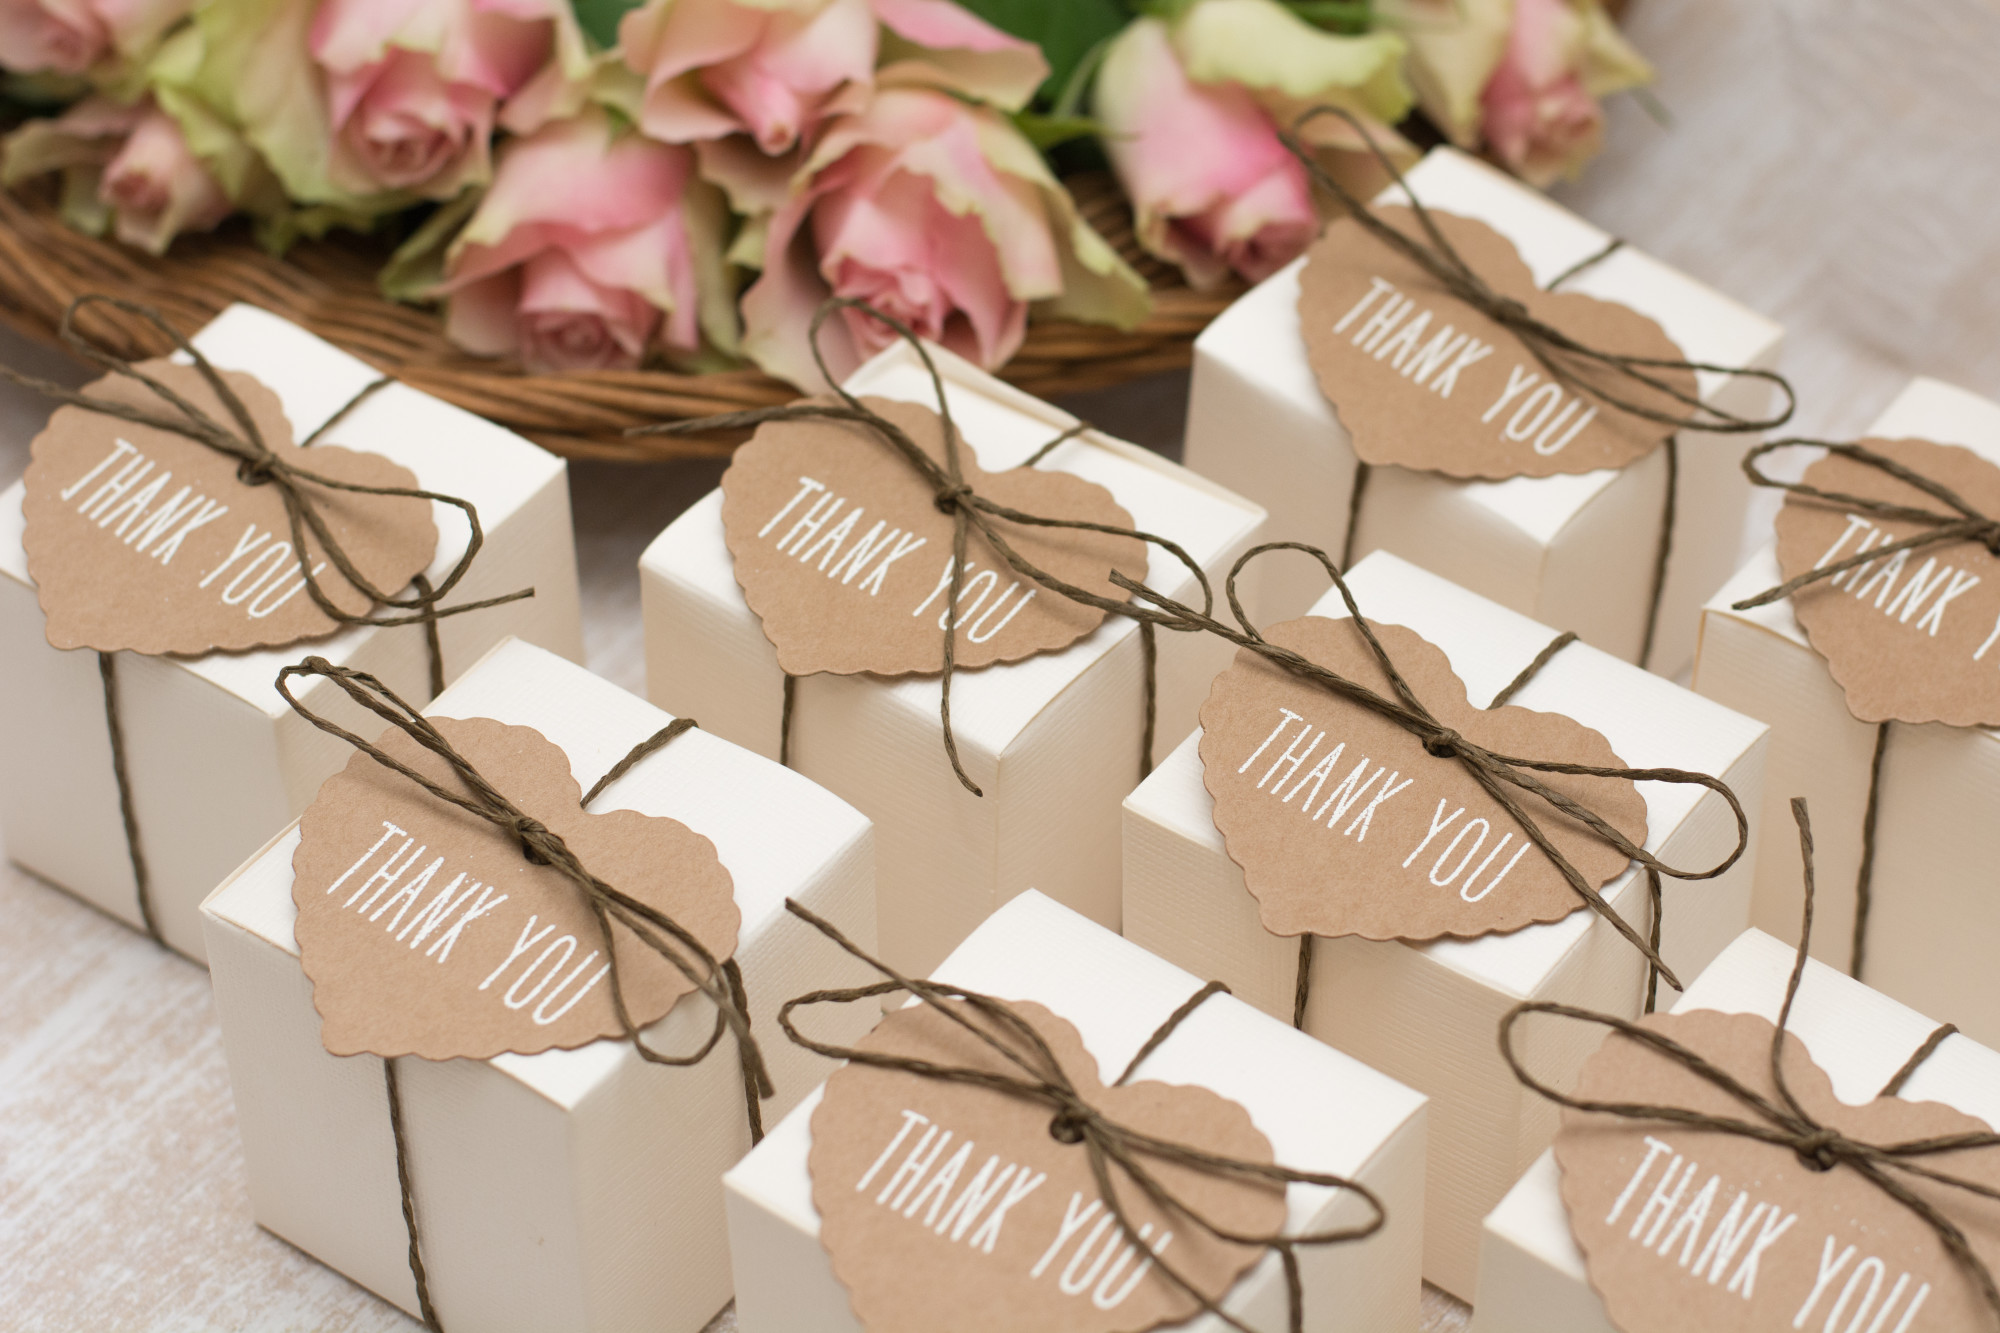 5 Wedding Favor Ideas That'll Impress Your Guests